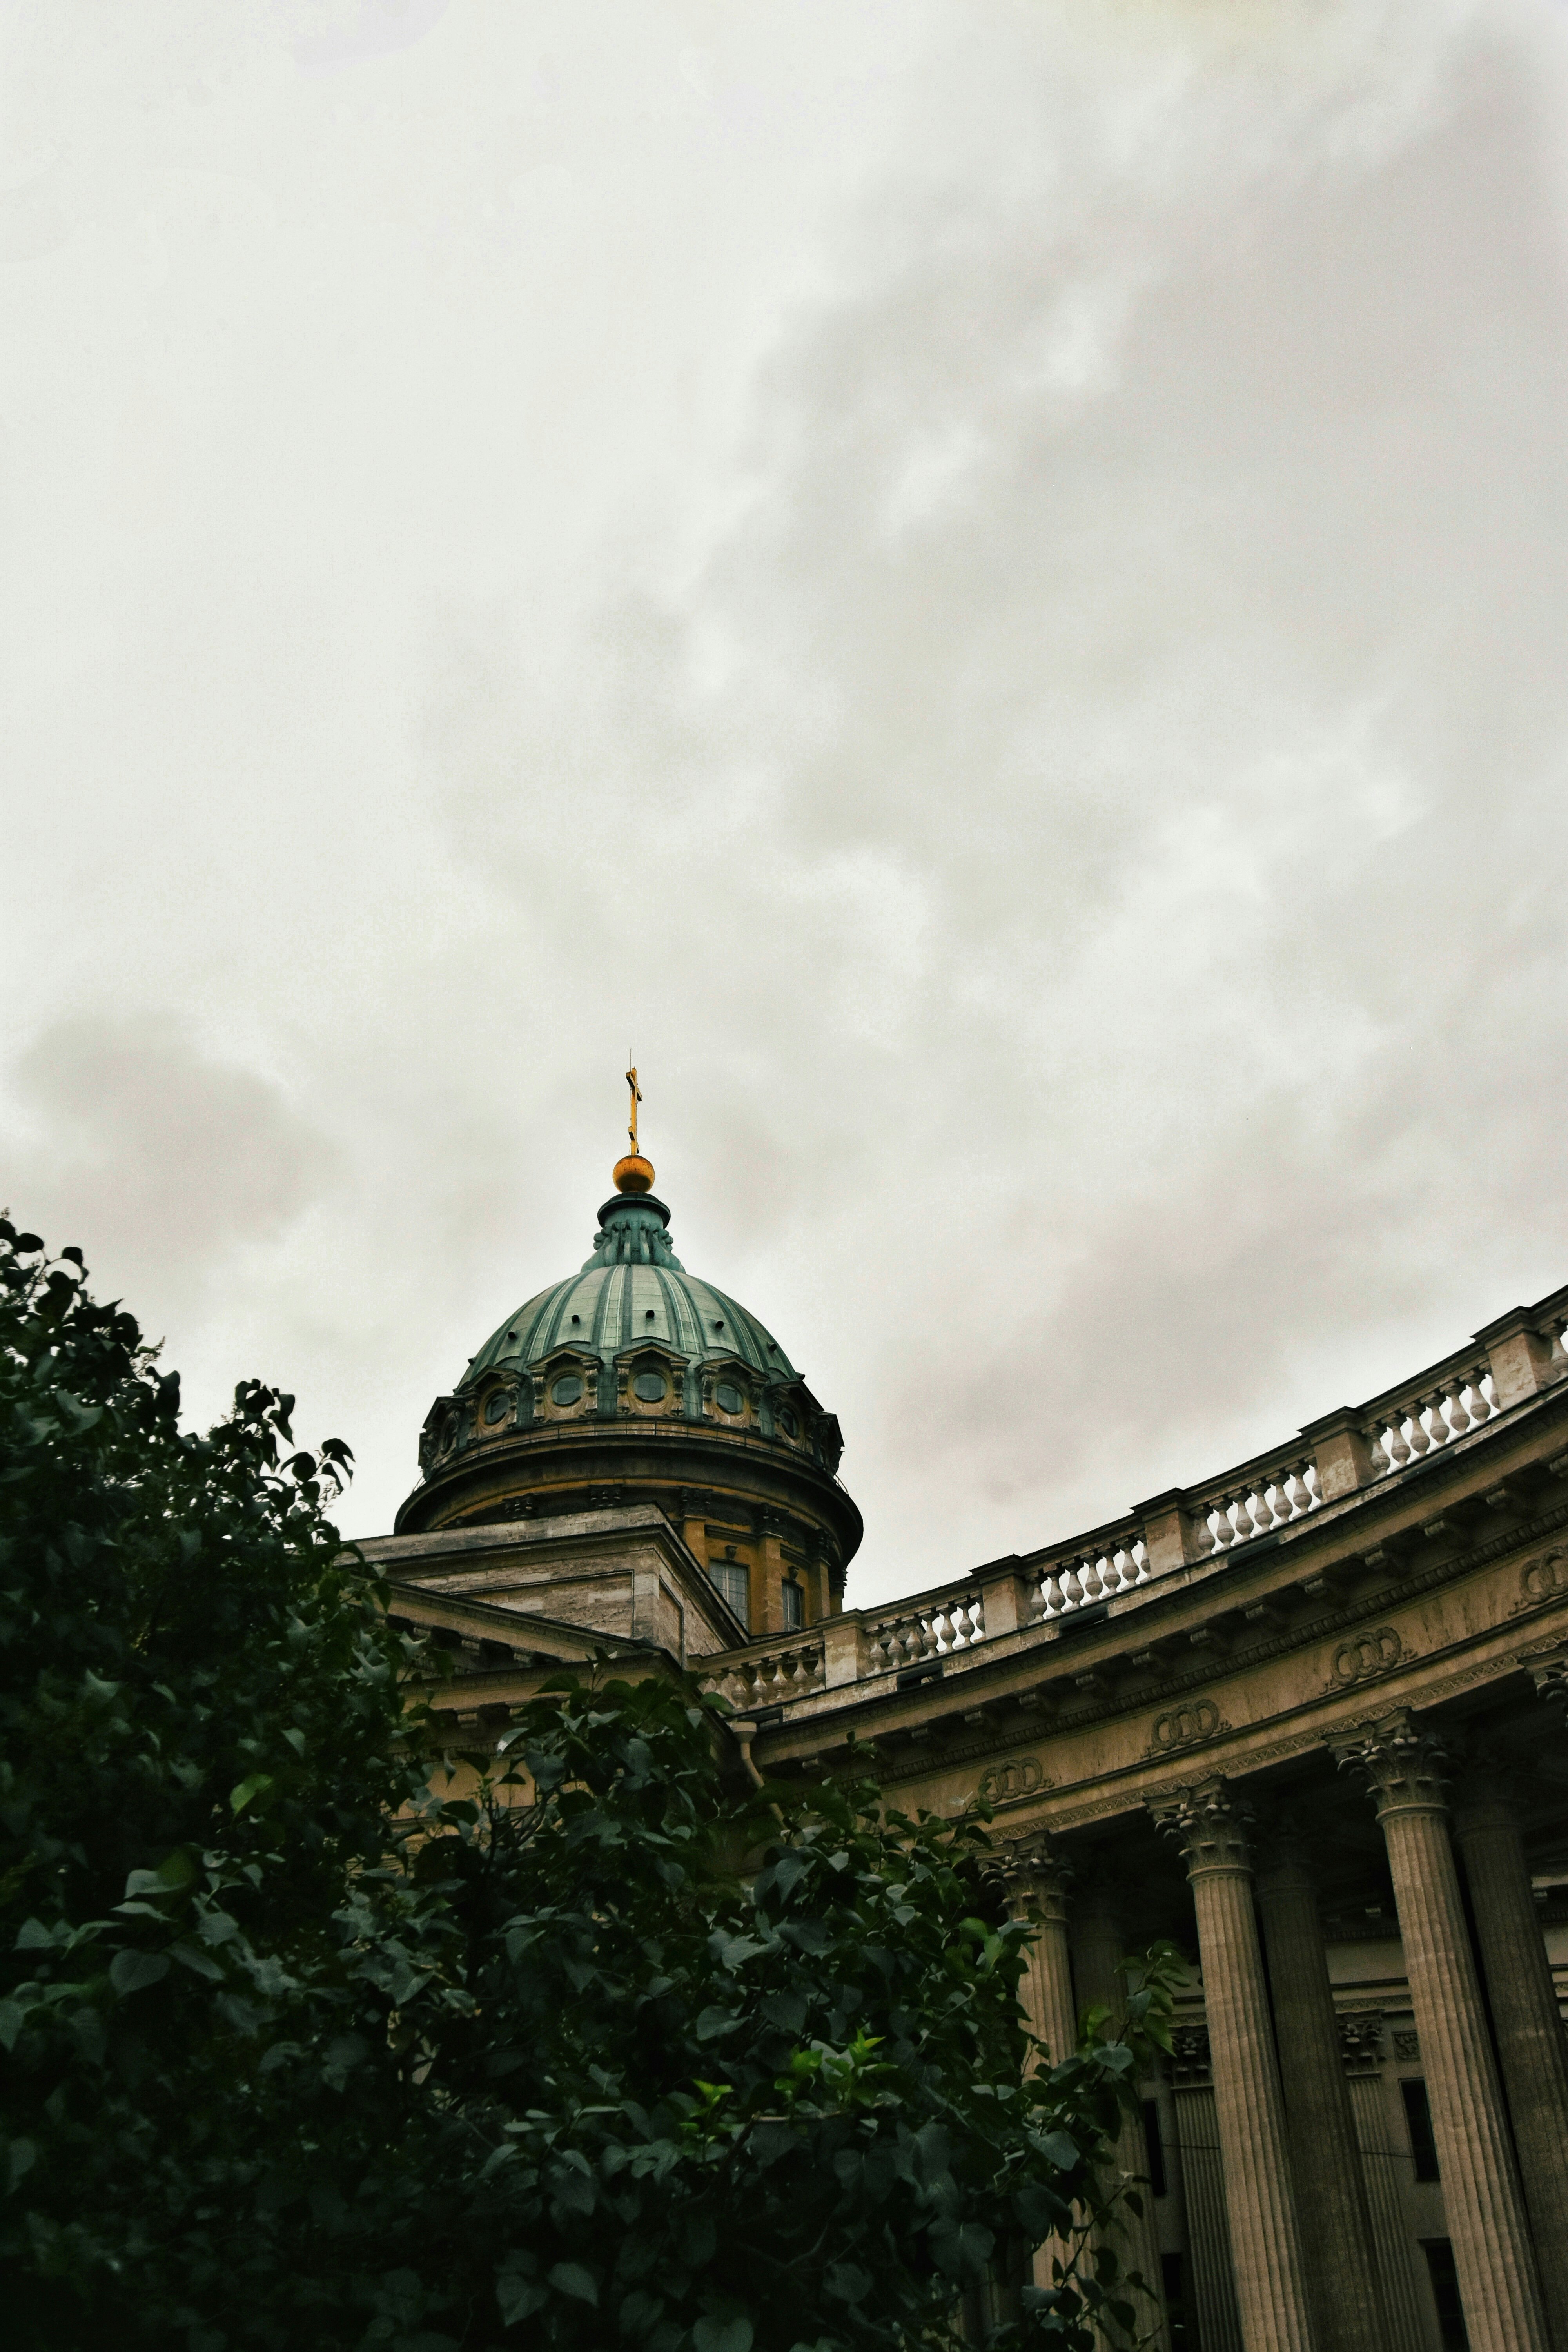 green and brown dome building under white clouds